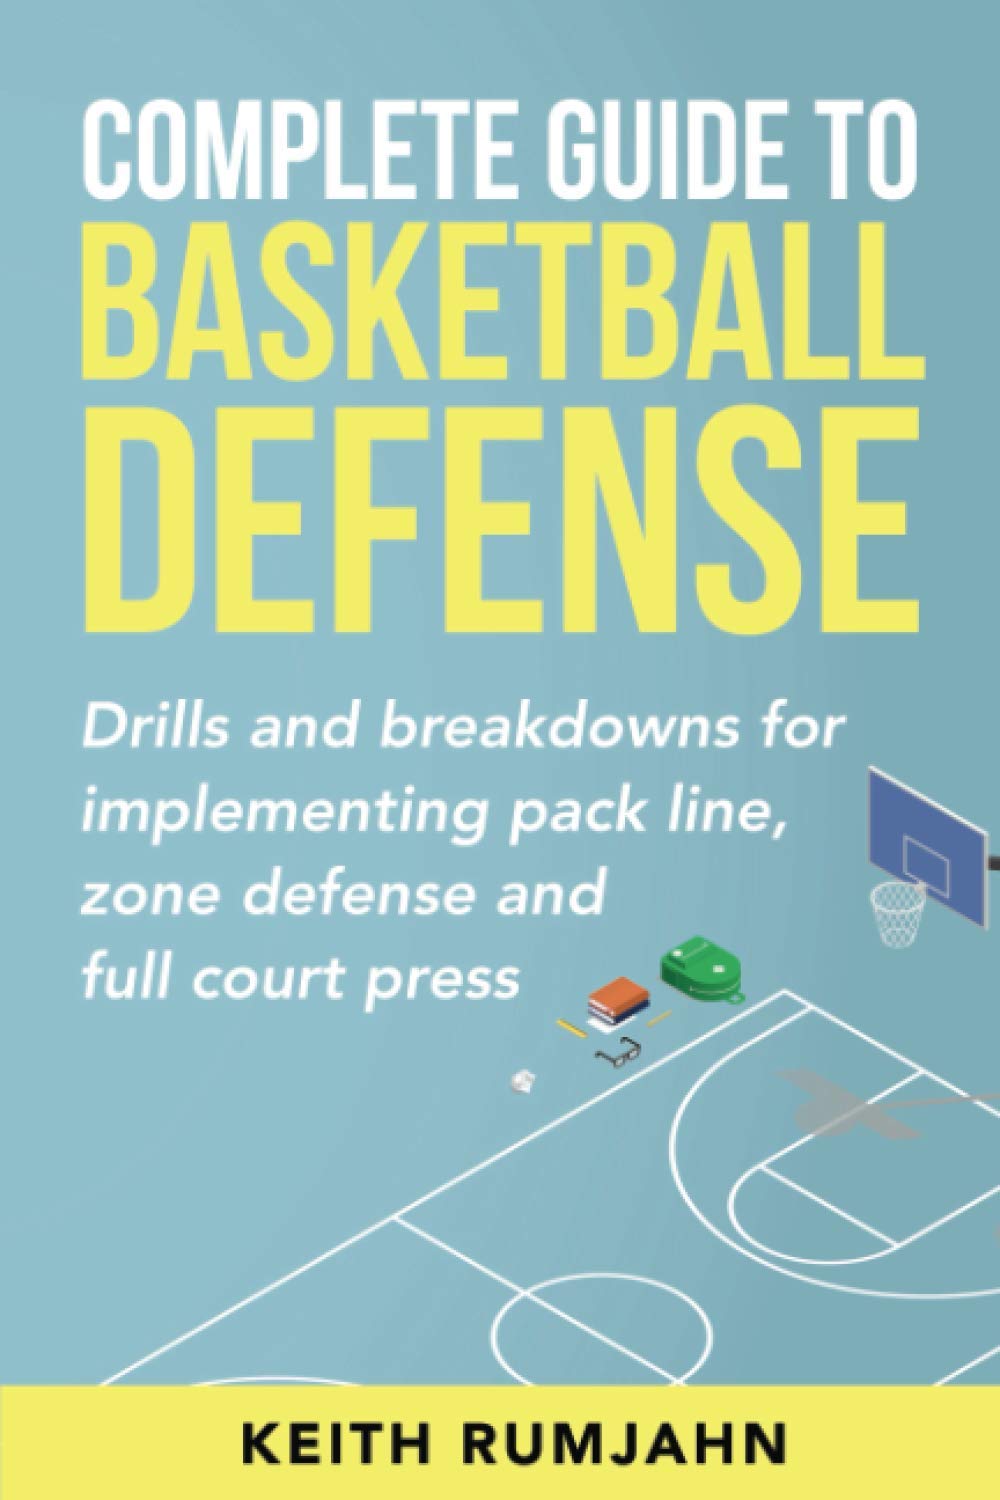 Complete Guide to Basketball Defense: Implementing pack line, zone defense or full court press: Drills and breakdowns for implementing pack line, zone defense or full court press (Basketball coaching)